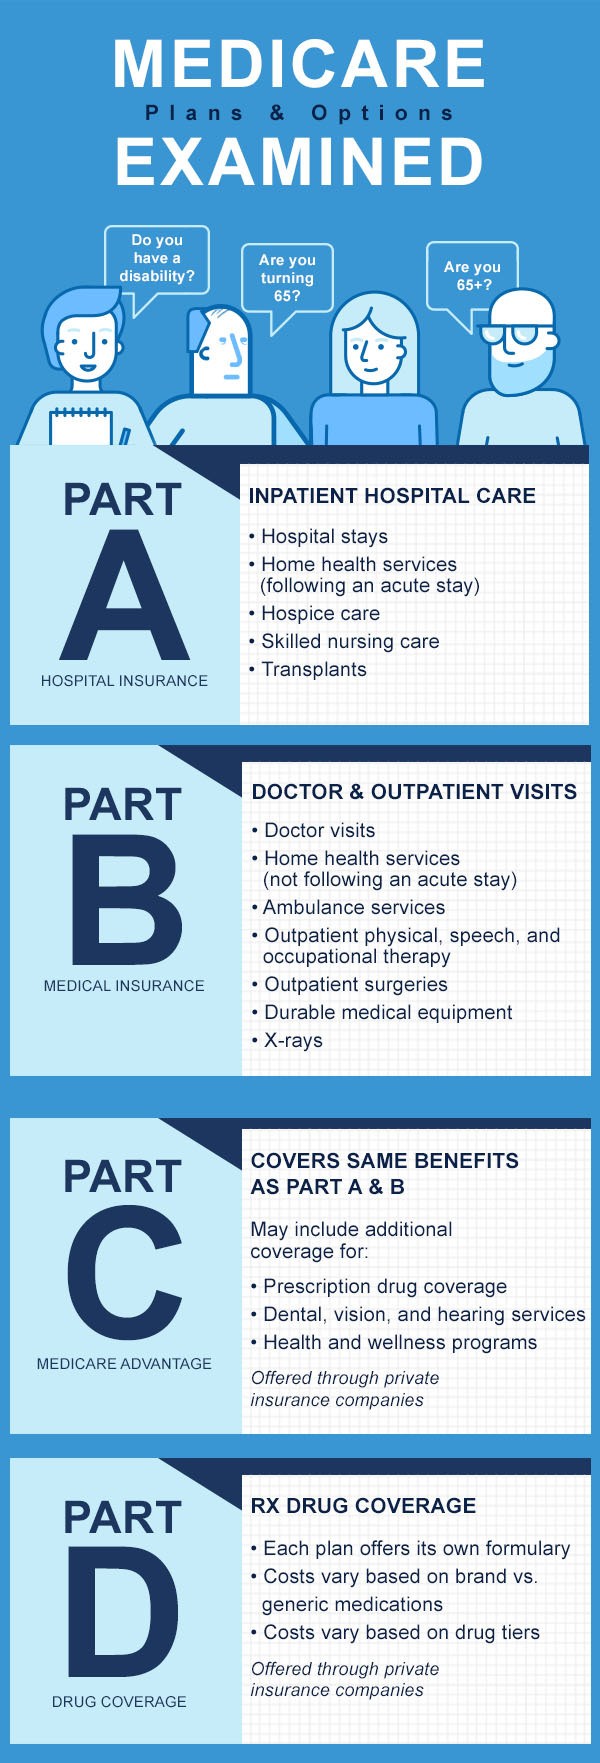 Your Guide to Understanding Medicare Parts A-D | Medicare & Medicare Advantage Info, Help and ...